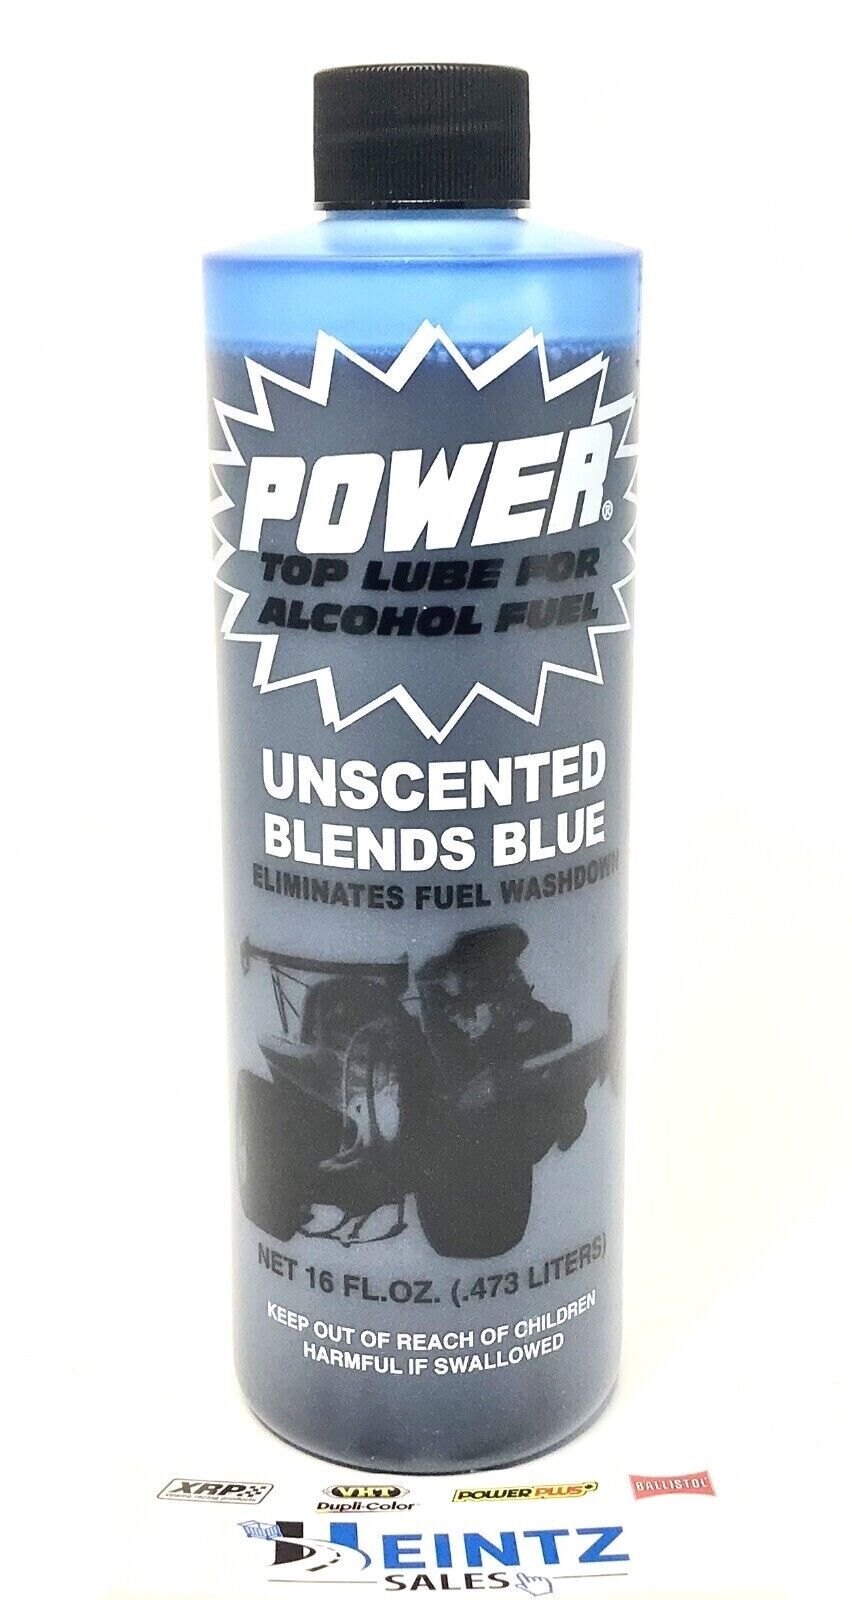 Power Plus UNSCENTED BLUE Lubricant Fuel Additive Alcohol Top Lube - 16 fl oz